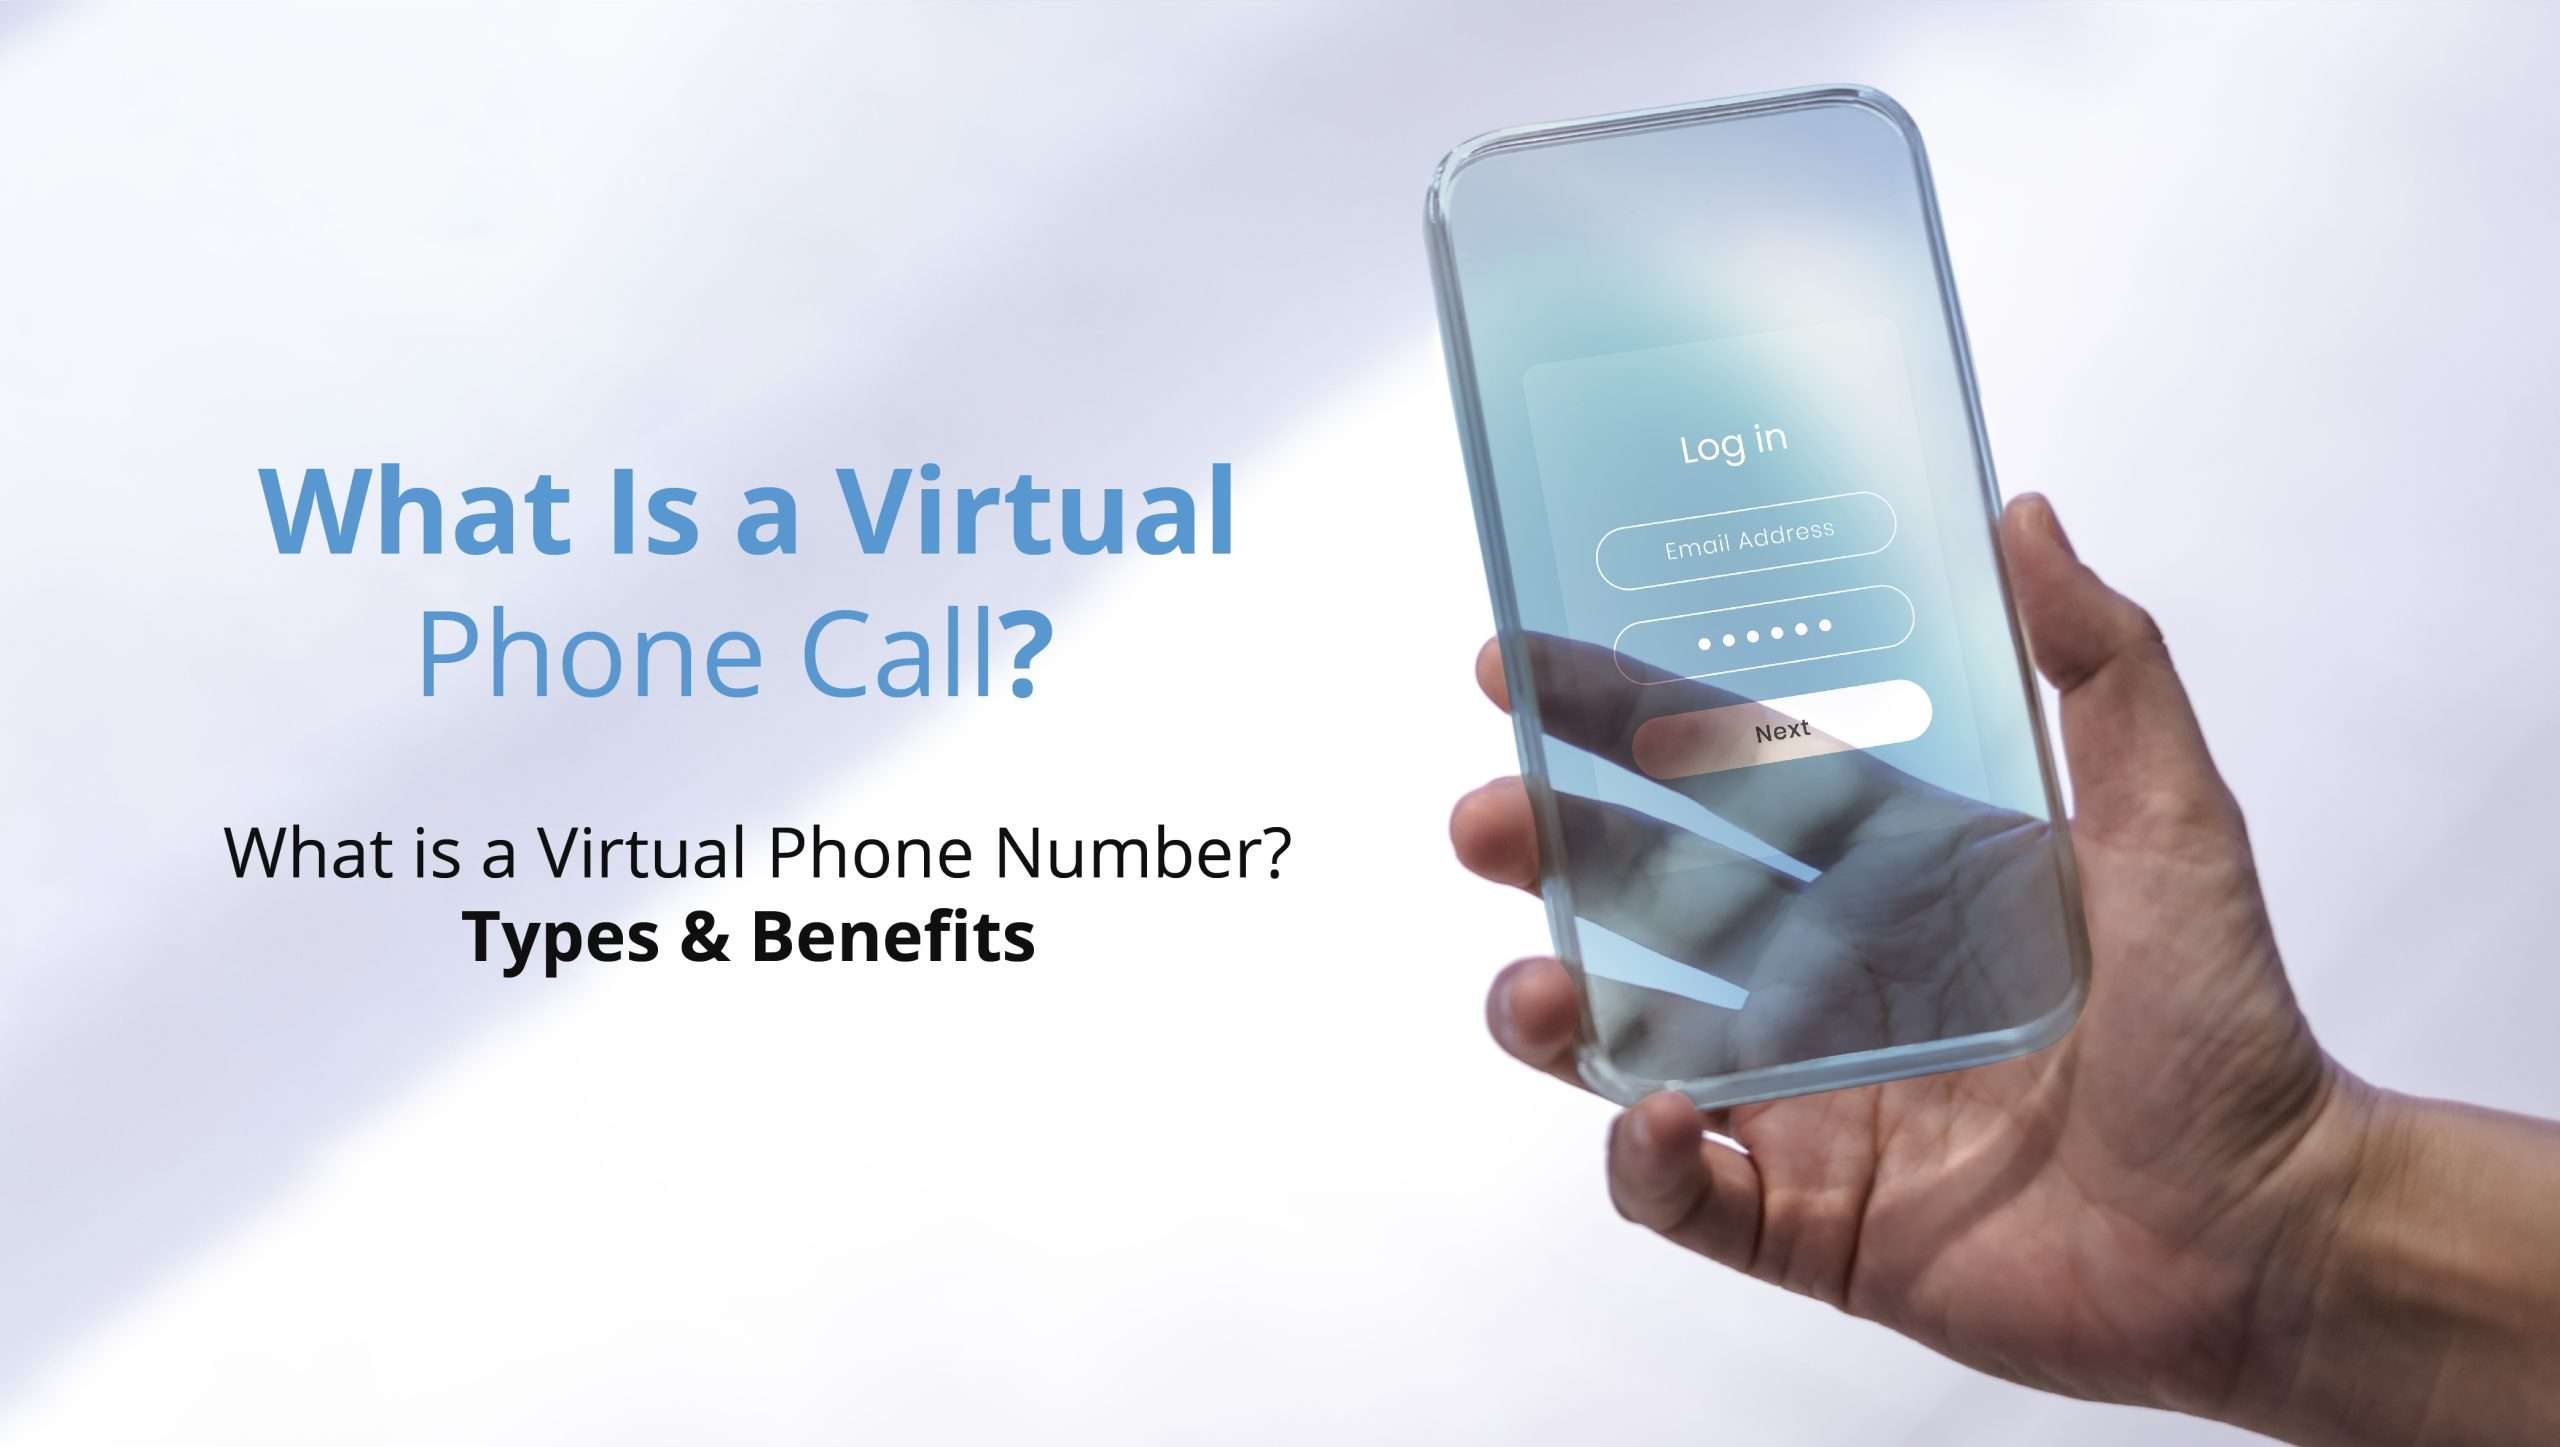 Virtual phone number types and benifits